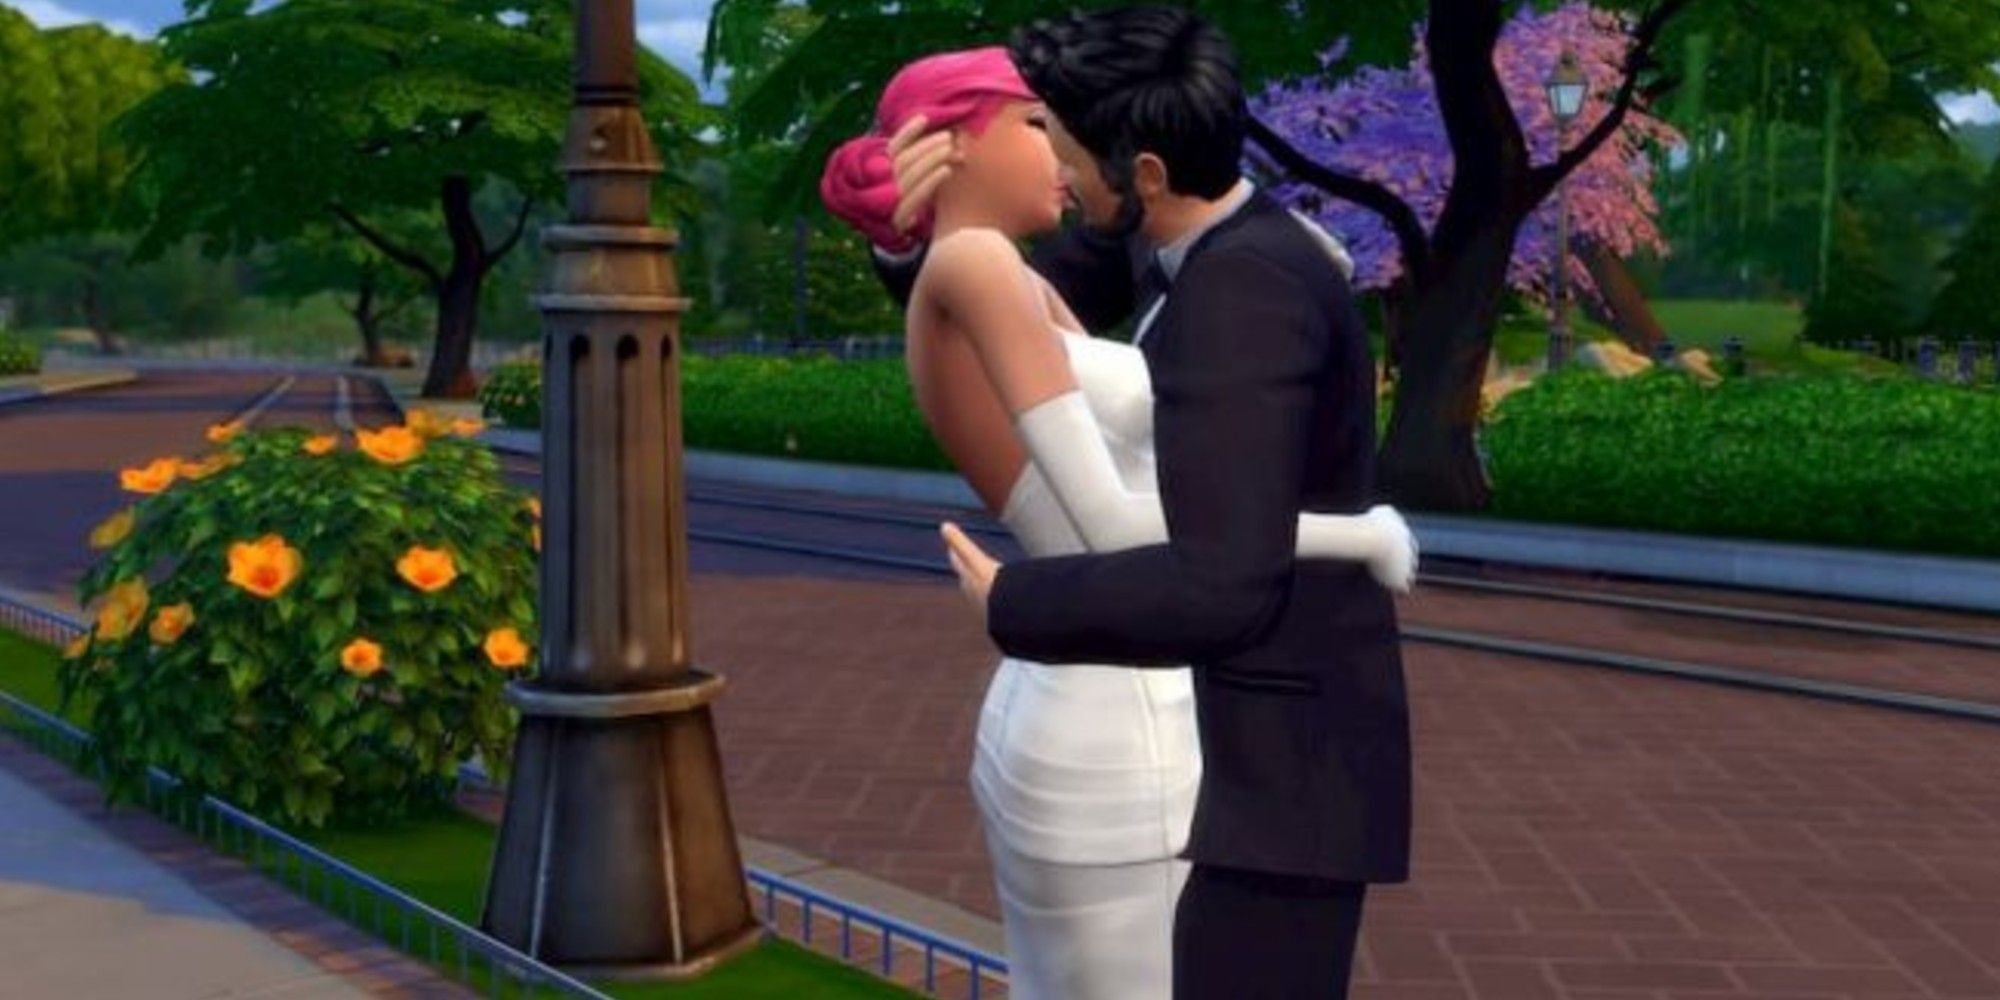 The Sims 4 couple being romantic. 